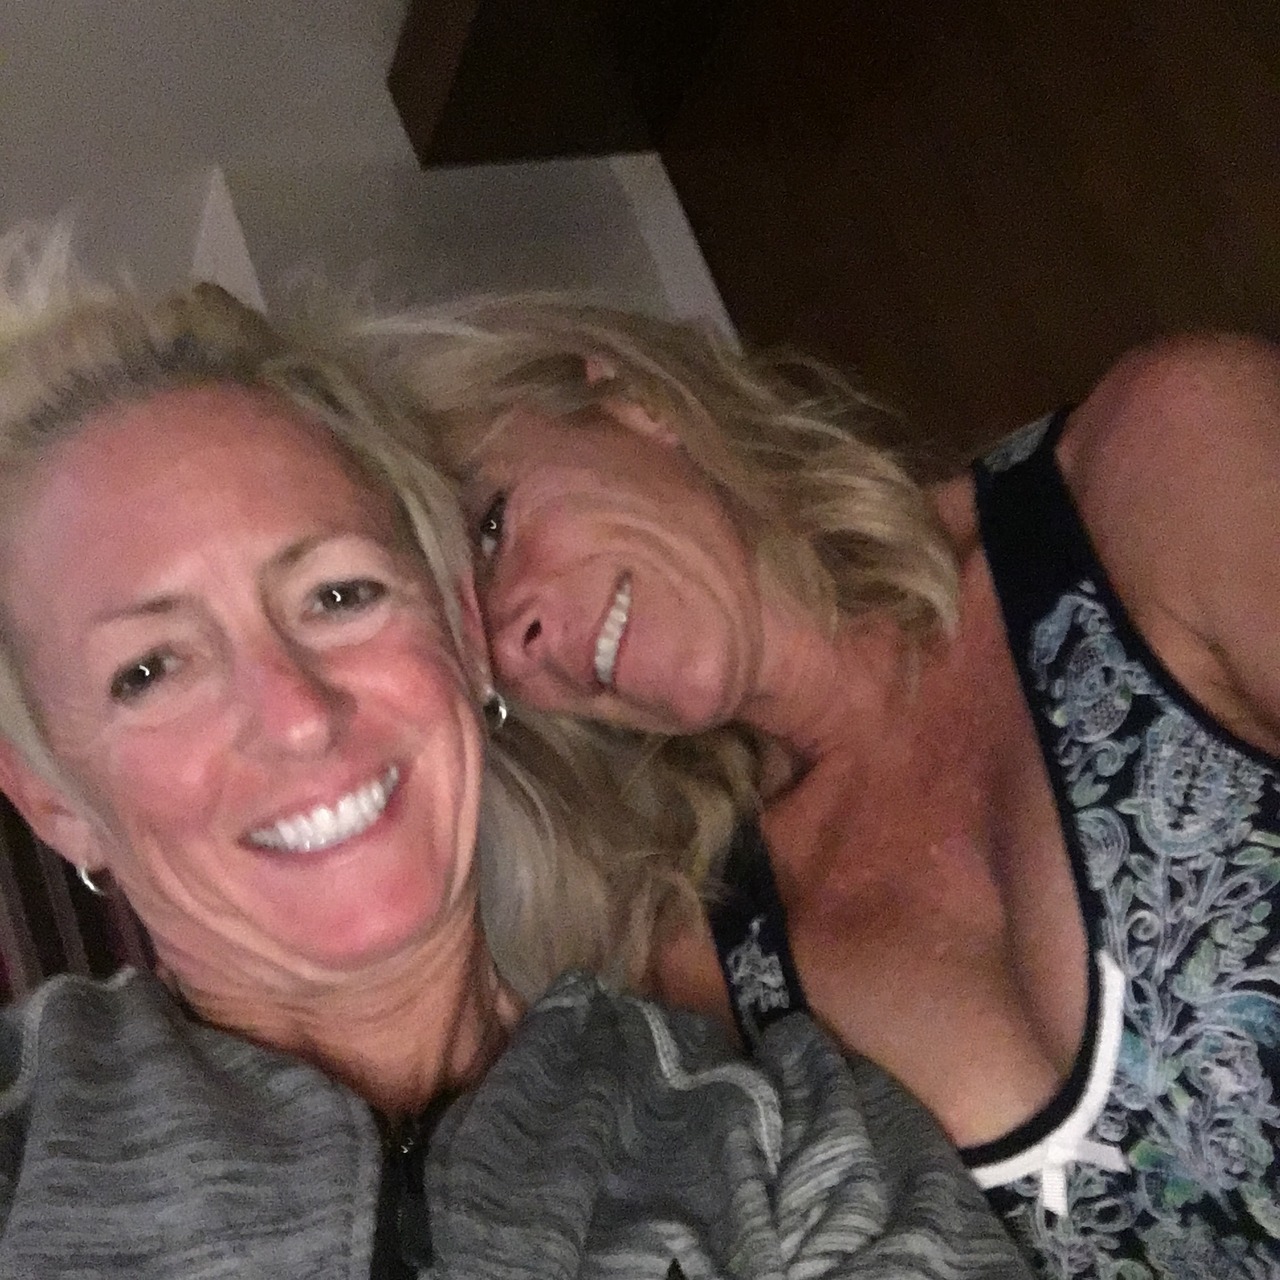 southernfeeling:  Girls trip for wife &amp; big tits swinger girl friend,  heading